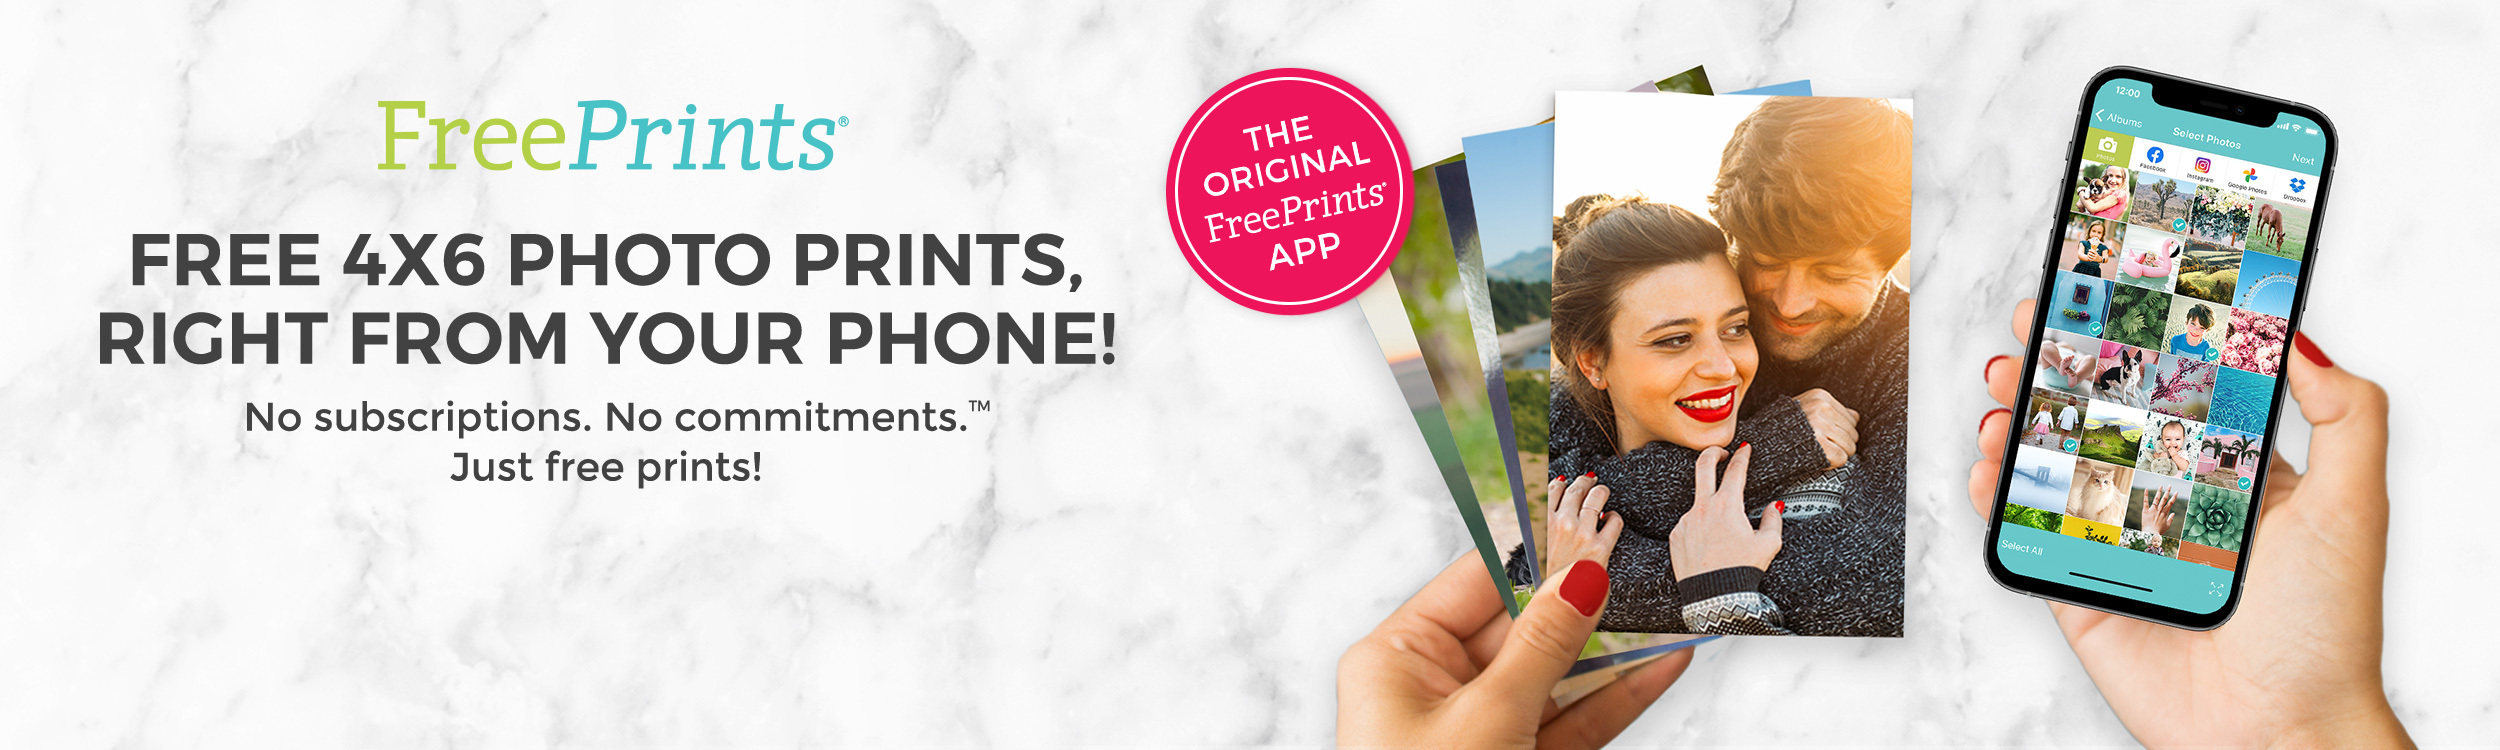 Free 4x6 Photo Prints, Right from your phone!